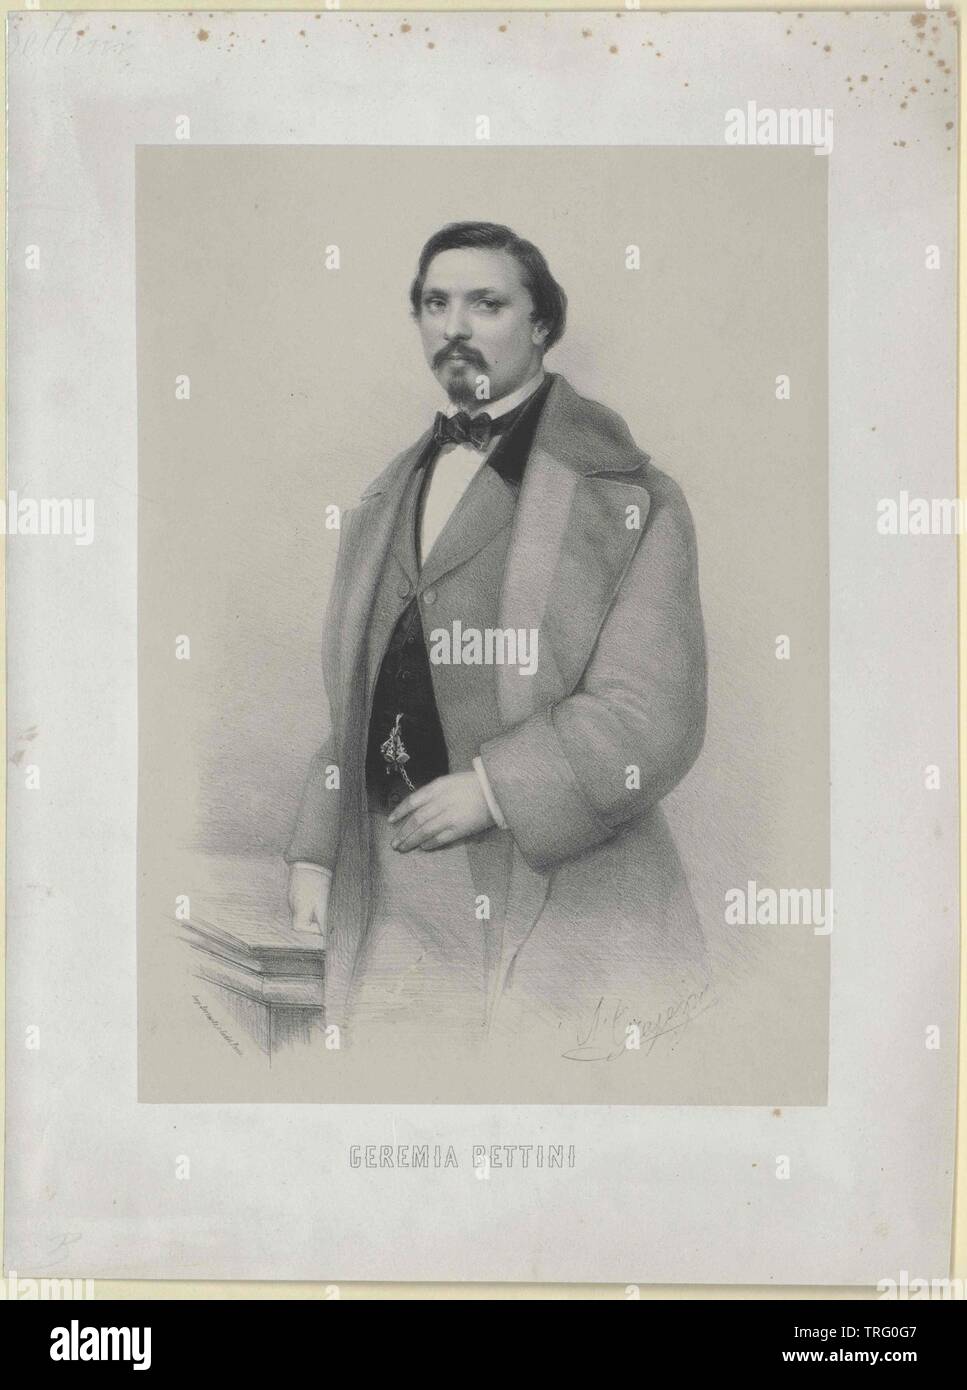 Bettini, Geremia, tenor at the Viennese opera 1854-1859, Additional-Rights-Clearance-Info-Not-Available Stock Photo